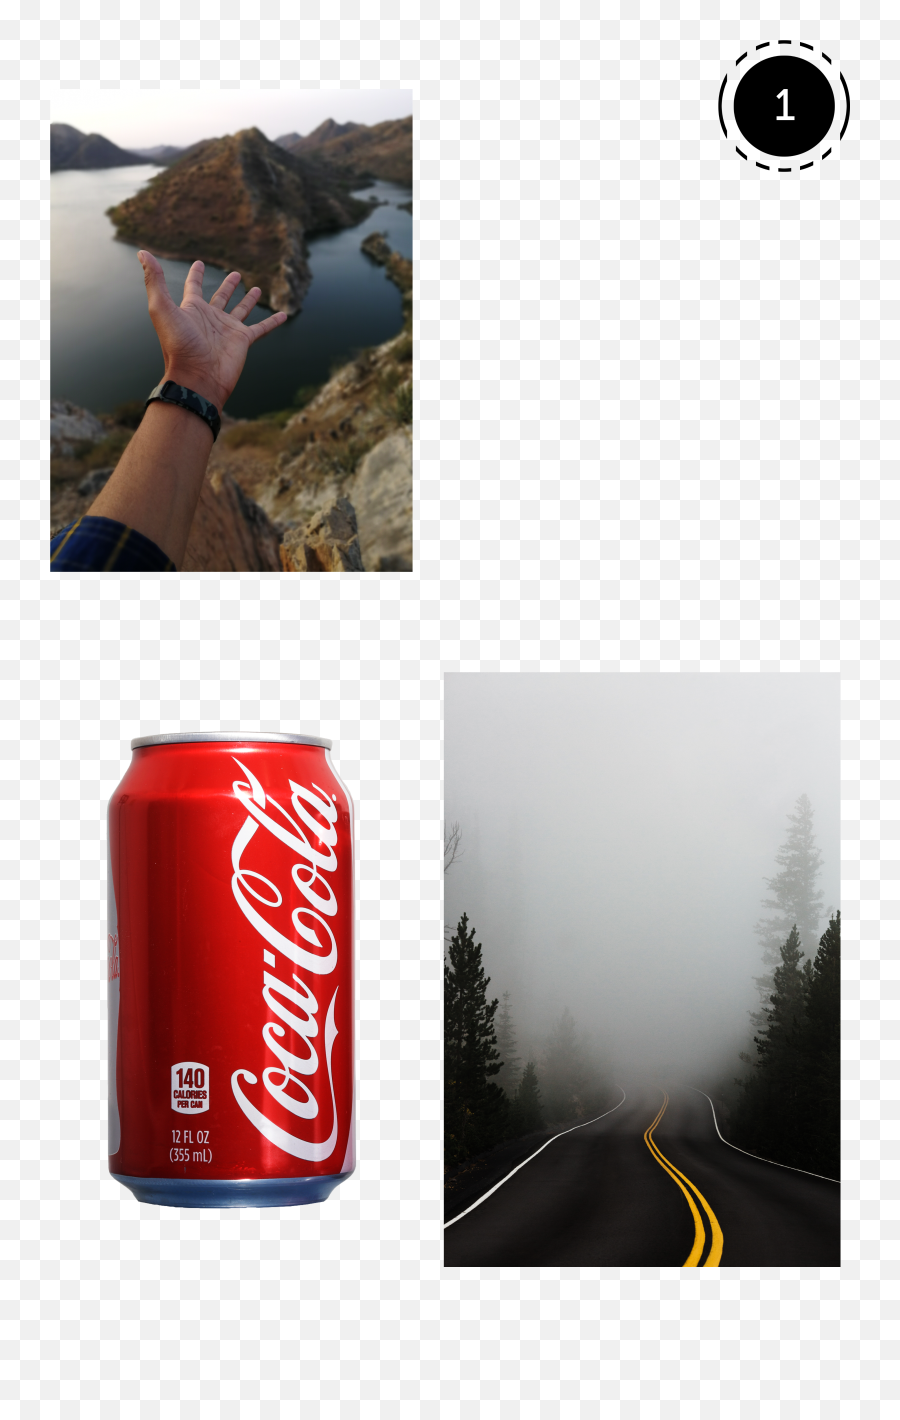 Download Coke Can From The Extended Png Transparent Background